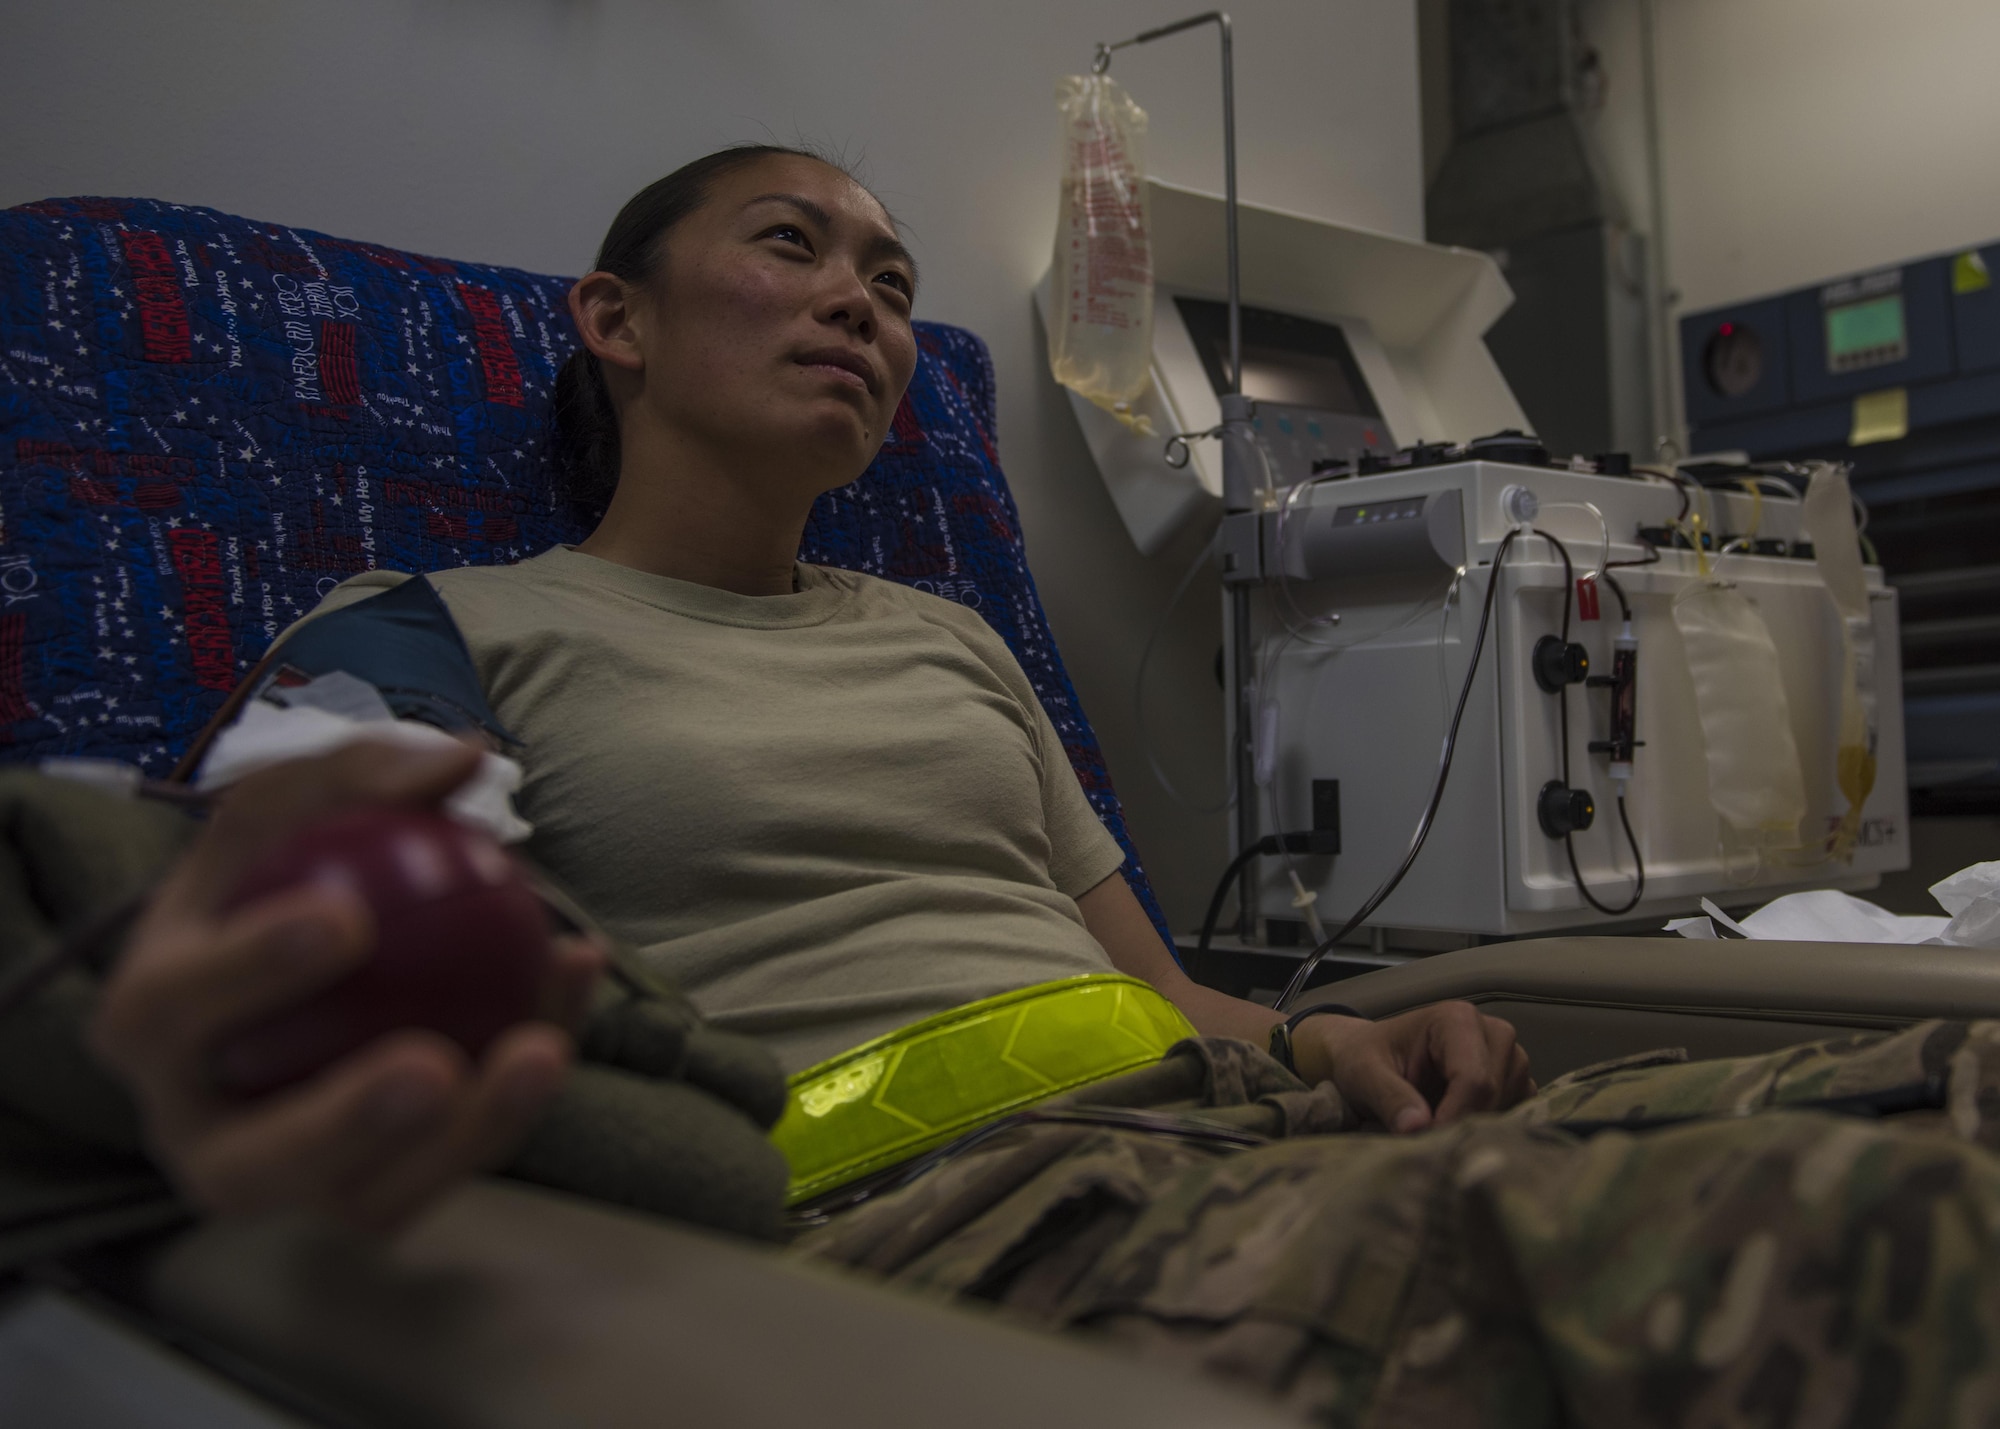 Capt. Kellyanne Matsuoka, 455th Expeditionary Aircraft Maintenance Squadron operations officer, donates blood during an urgent need for blood donations, June 24, 2016, Bagram Airfield, Afghanistan. In an urgent call from the Craig Joint-Theater Hospital, all pre-screened personnel with B type blood reported to the hospital to donate blood. (U.S. Air Force photo by Senior Airman Justyn M. Freeman)